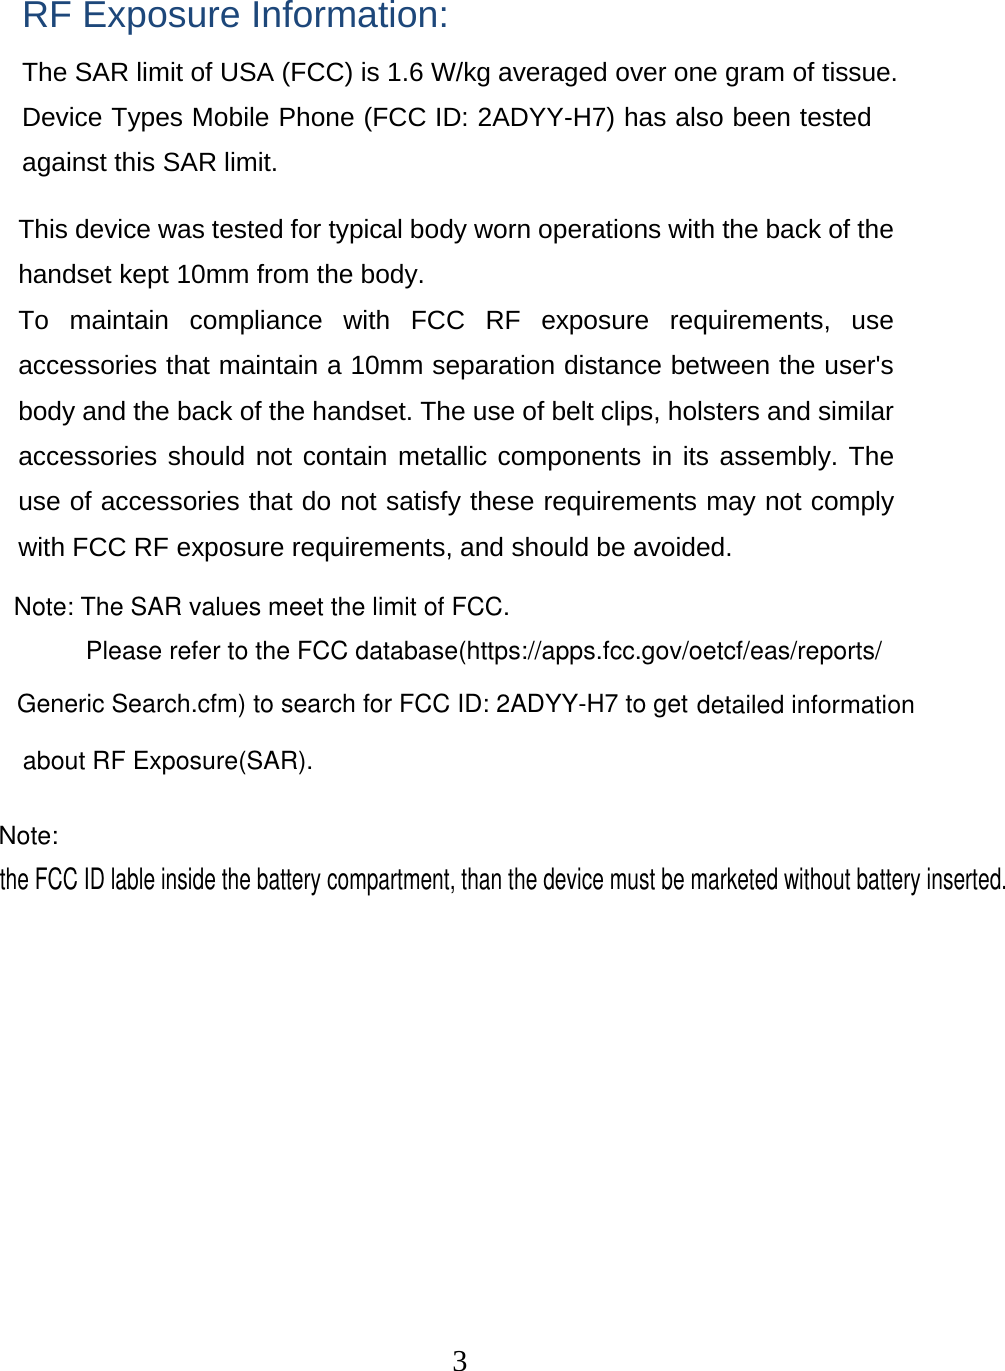  3 RF Exposure Information: The SAR limit of USA (FCC) is 1.6 W/kg averaged over one gram of tissue. Device Types Mobile Phone (FCC ID: 2ADYY-H7) has also been tested against this SAR limit. This device was tested for typical body worn operations with the back of the handset kept 10mm from the body. To maintain compliance with FCC RF exposure requirements, use accessories that maintain a 10mm separation distance between the user&apos;s body and the back of the handset. The use of belt clips, holsters and similar accessories should not contain metallic components in its assembly. The use of accessories that do not satisfy these requirements may not comply with FCC RF exposure requirements, and should be avoided. Note: The SAR values meet the limit of FCC.Please refer to the FCC database(https://apps.fcc.gov/oetcf/eas/reports/Generic Search.cfm) to search for FCC ID: 2ADYY-H7 to get about RF Exposure(SAR).detailed informationNote: the FCC ID lable inside the battery compartment, than the device must be marketed without battery inserted. 